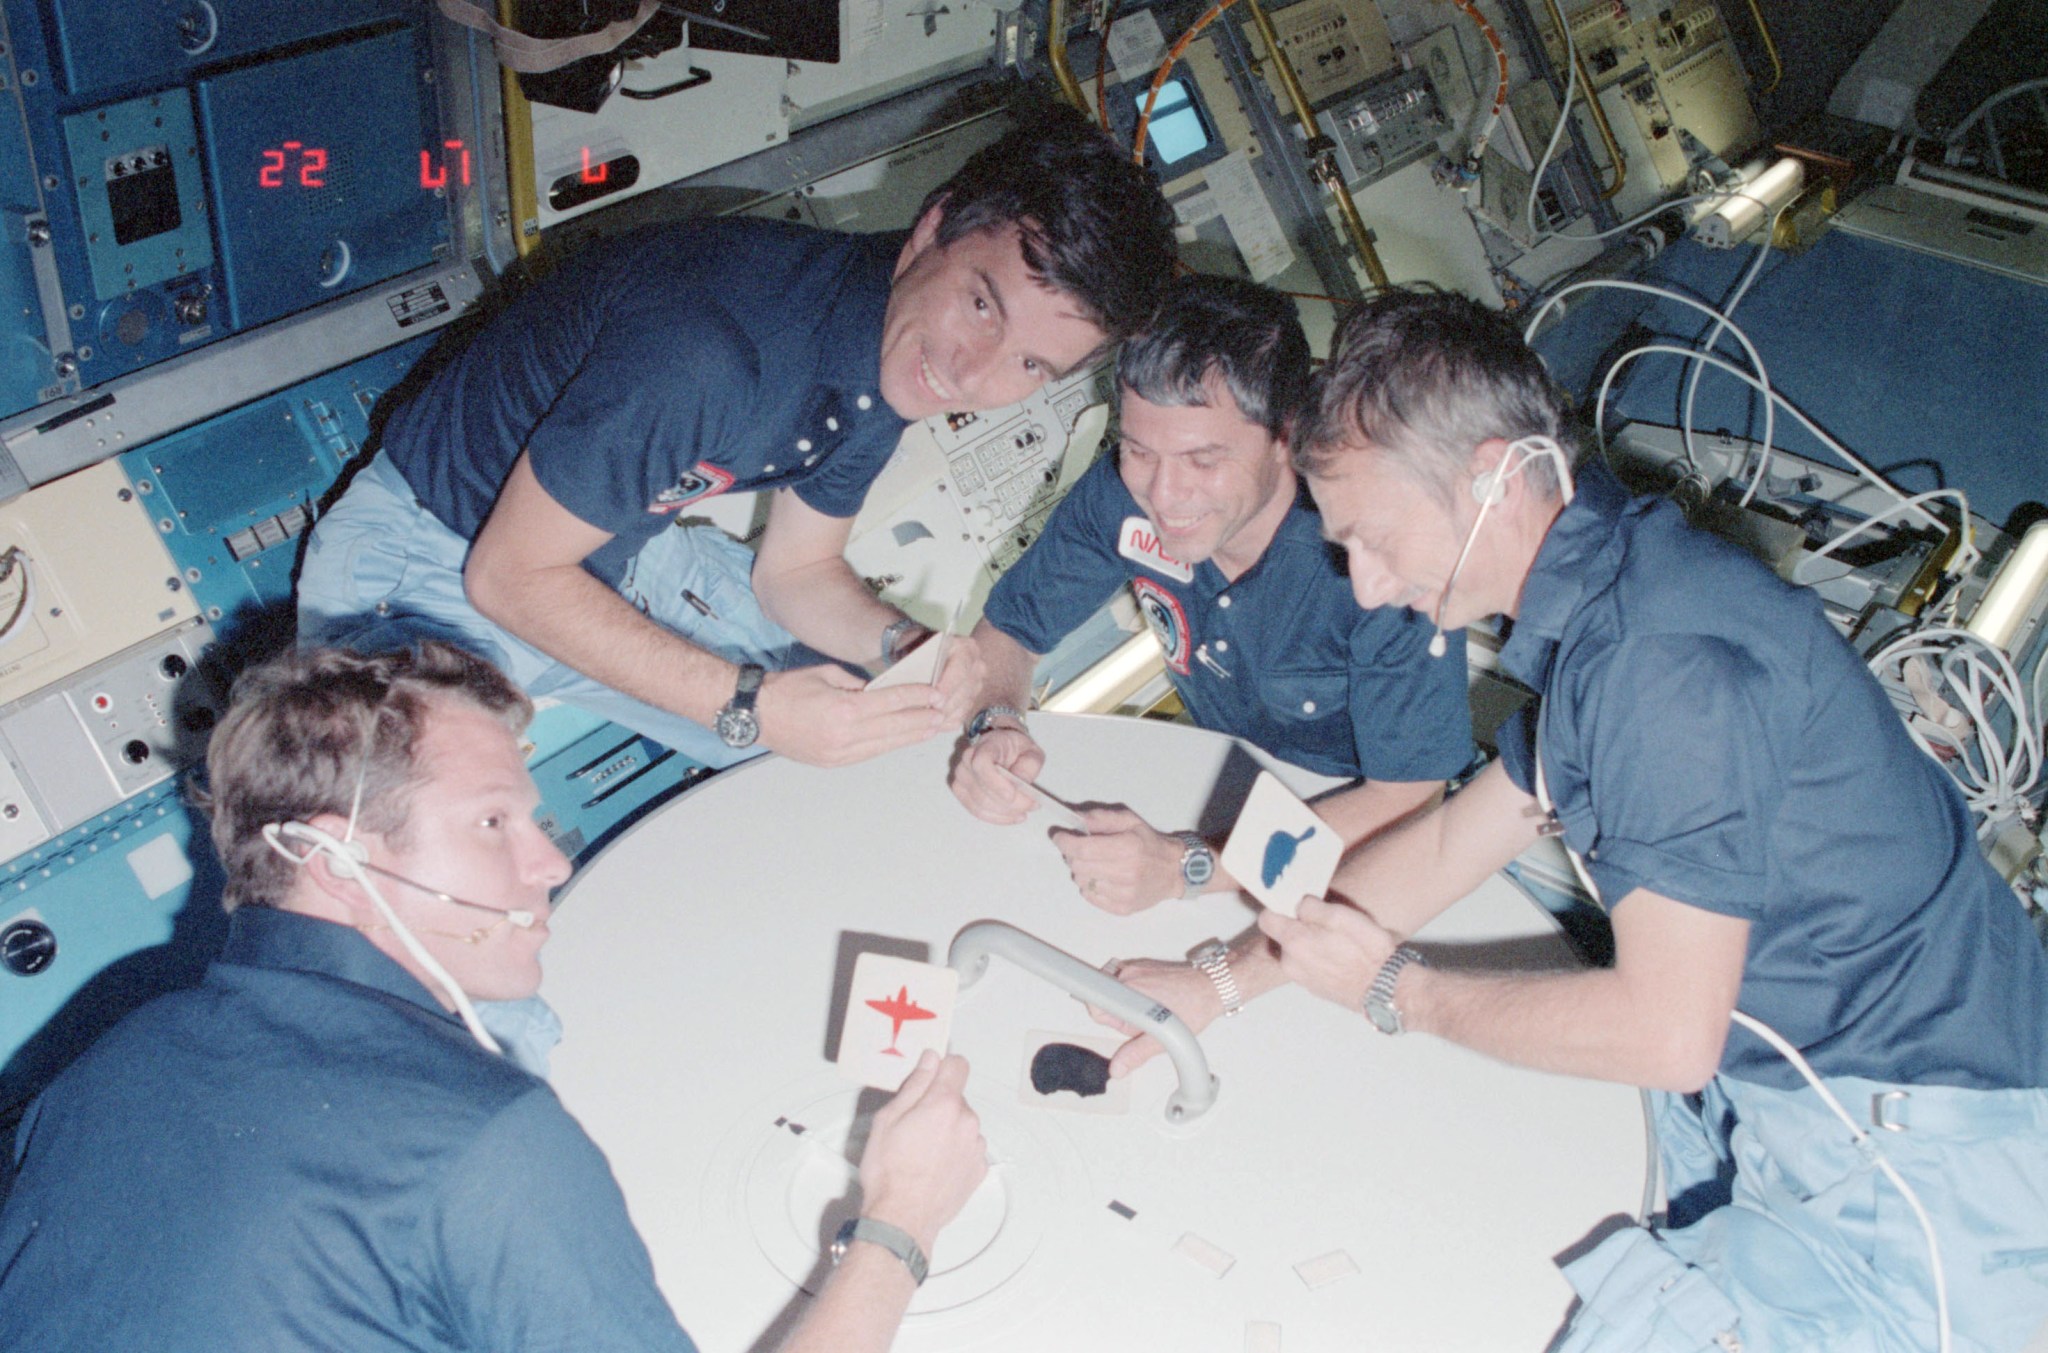 Four STS-9 crewmembers play a fun game with cards during their mission.